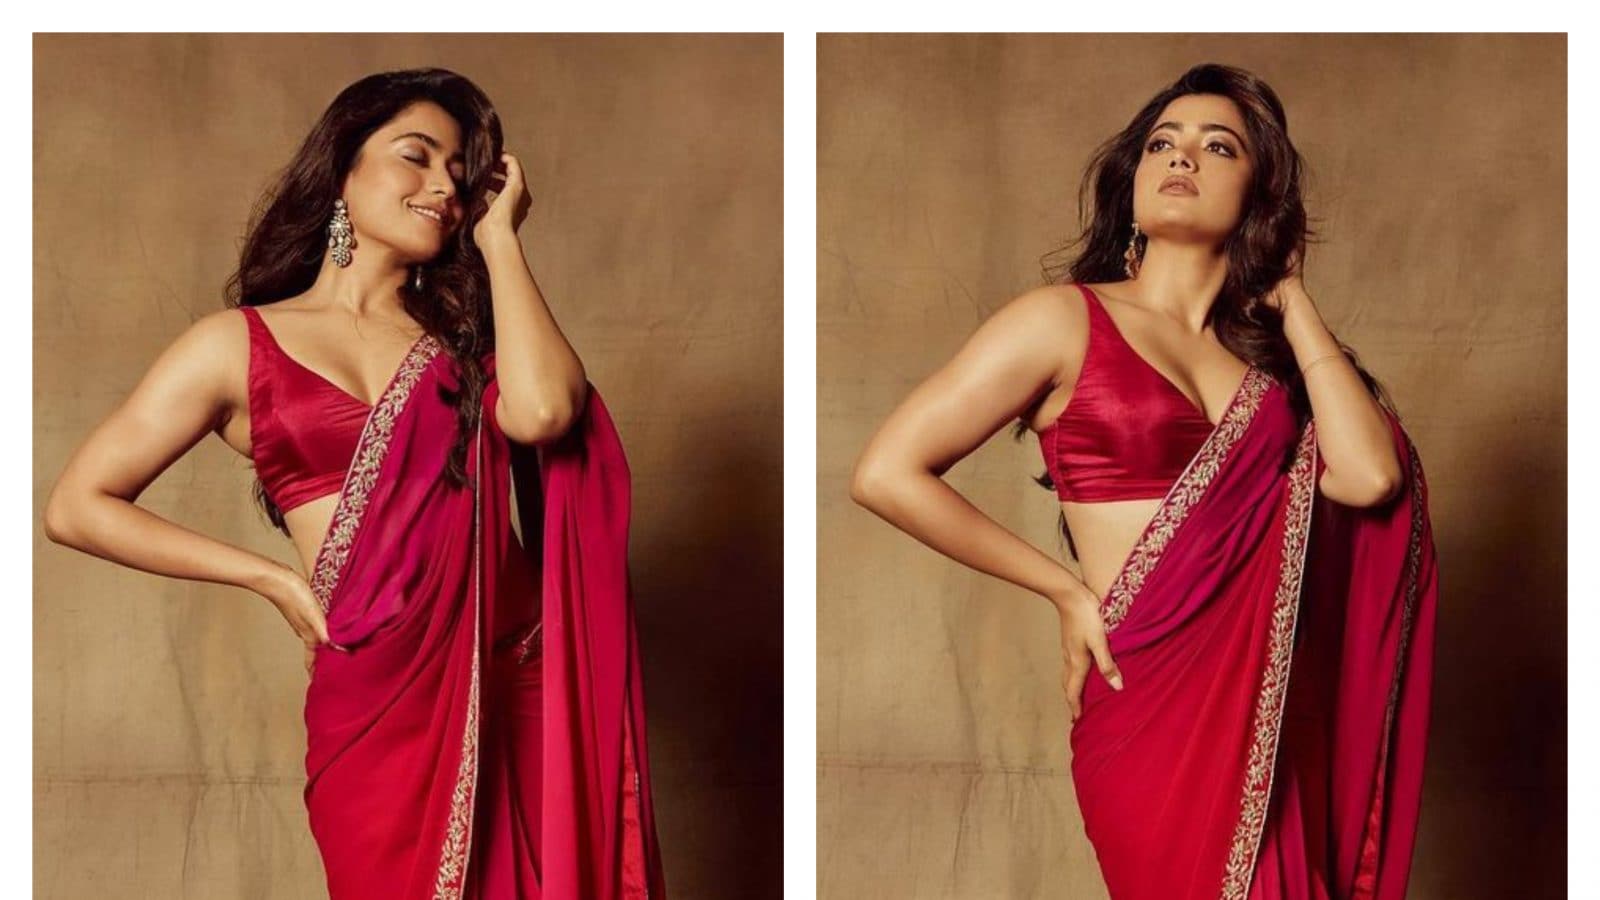 Rashmika Mandanna Is Elegance With Grace In a Pink Saree and ...